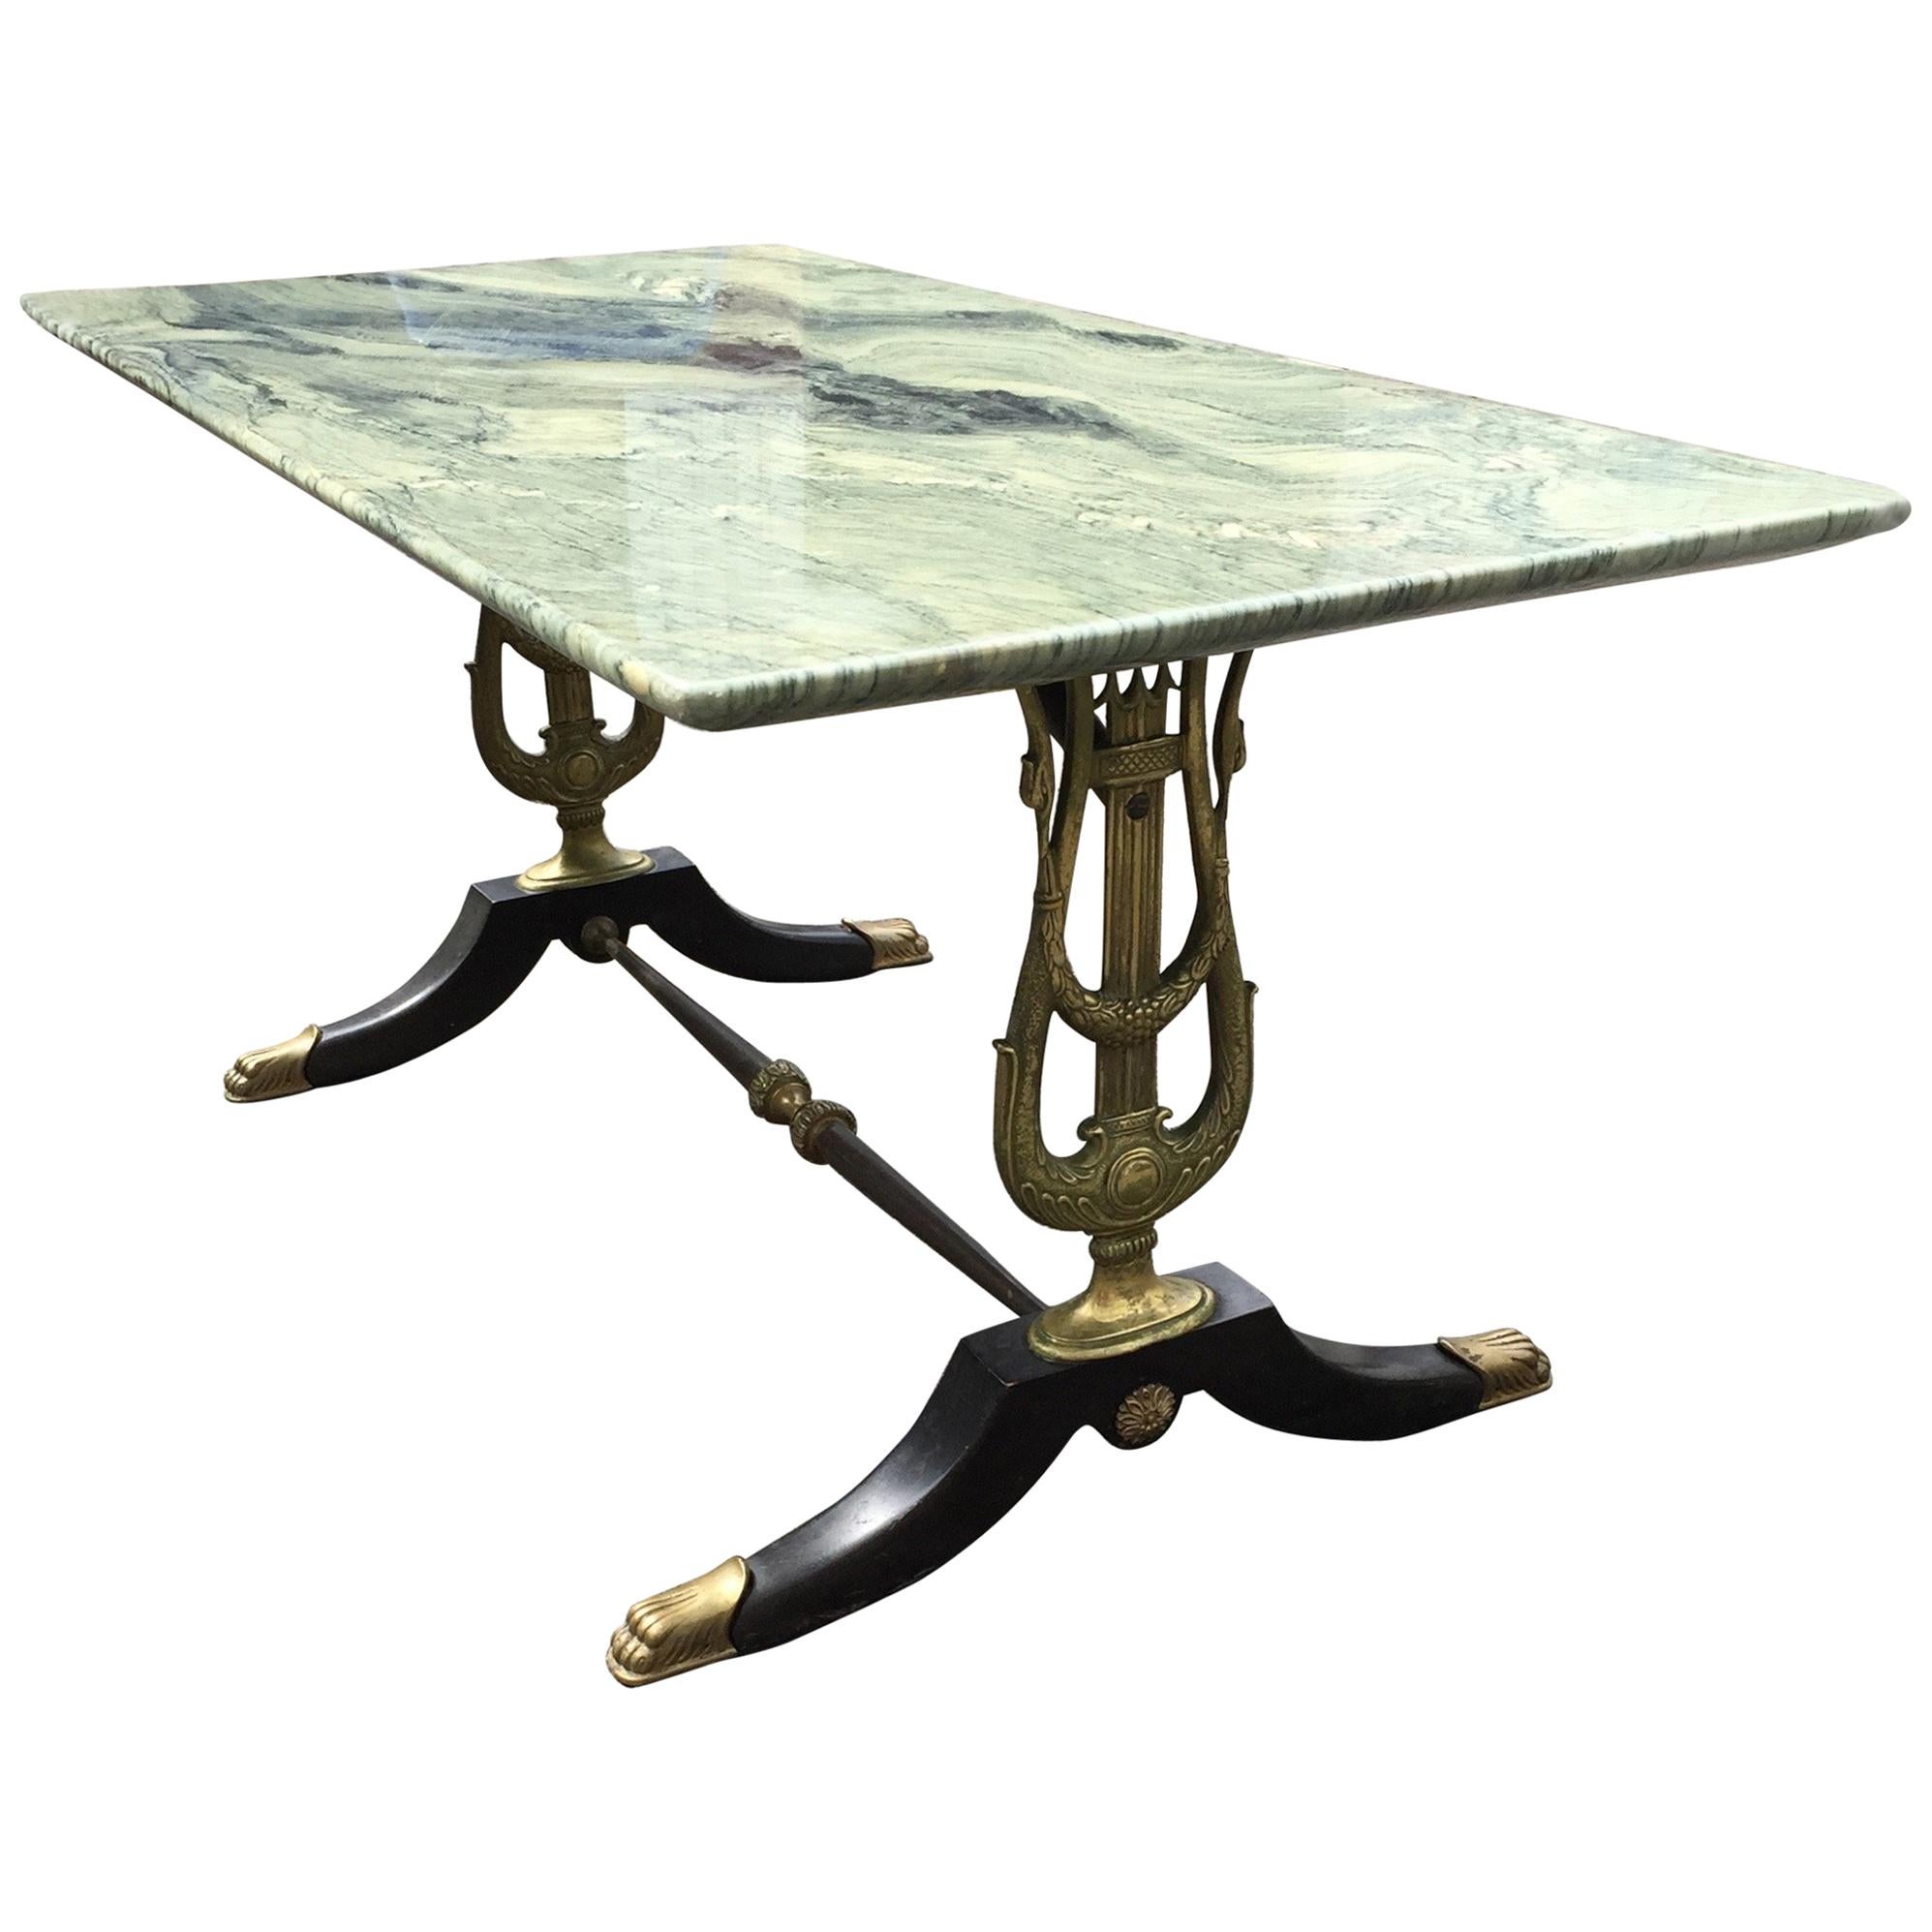 Stunning Empire Revival Coffee Table W. Bronze Swan Supports & Green Marble Top